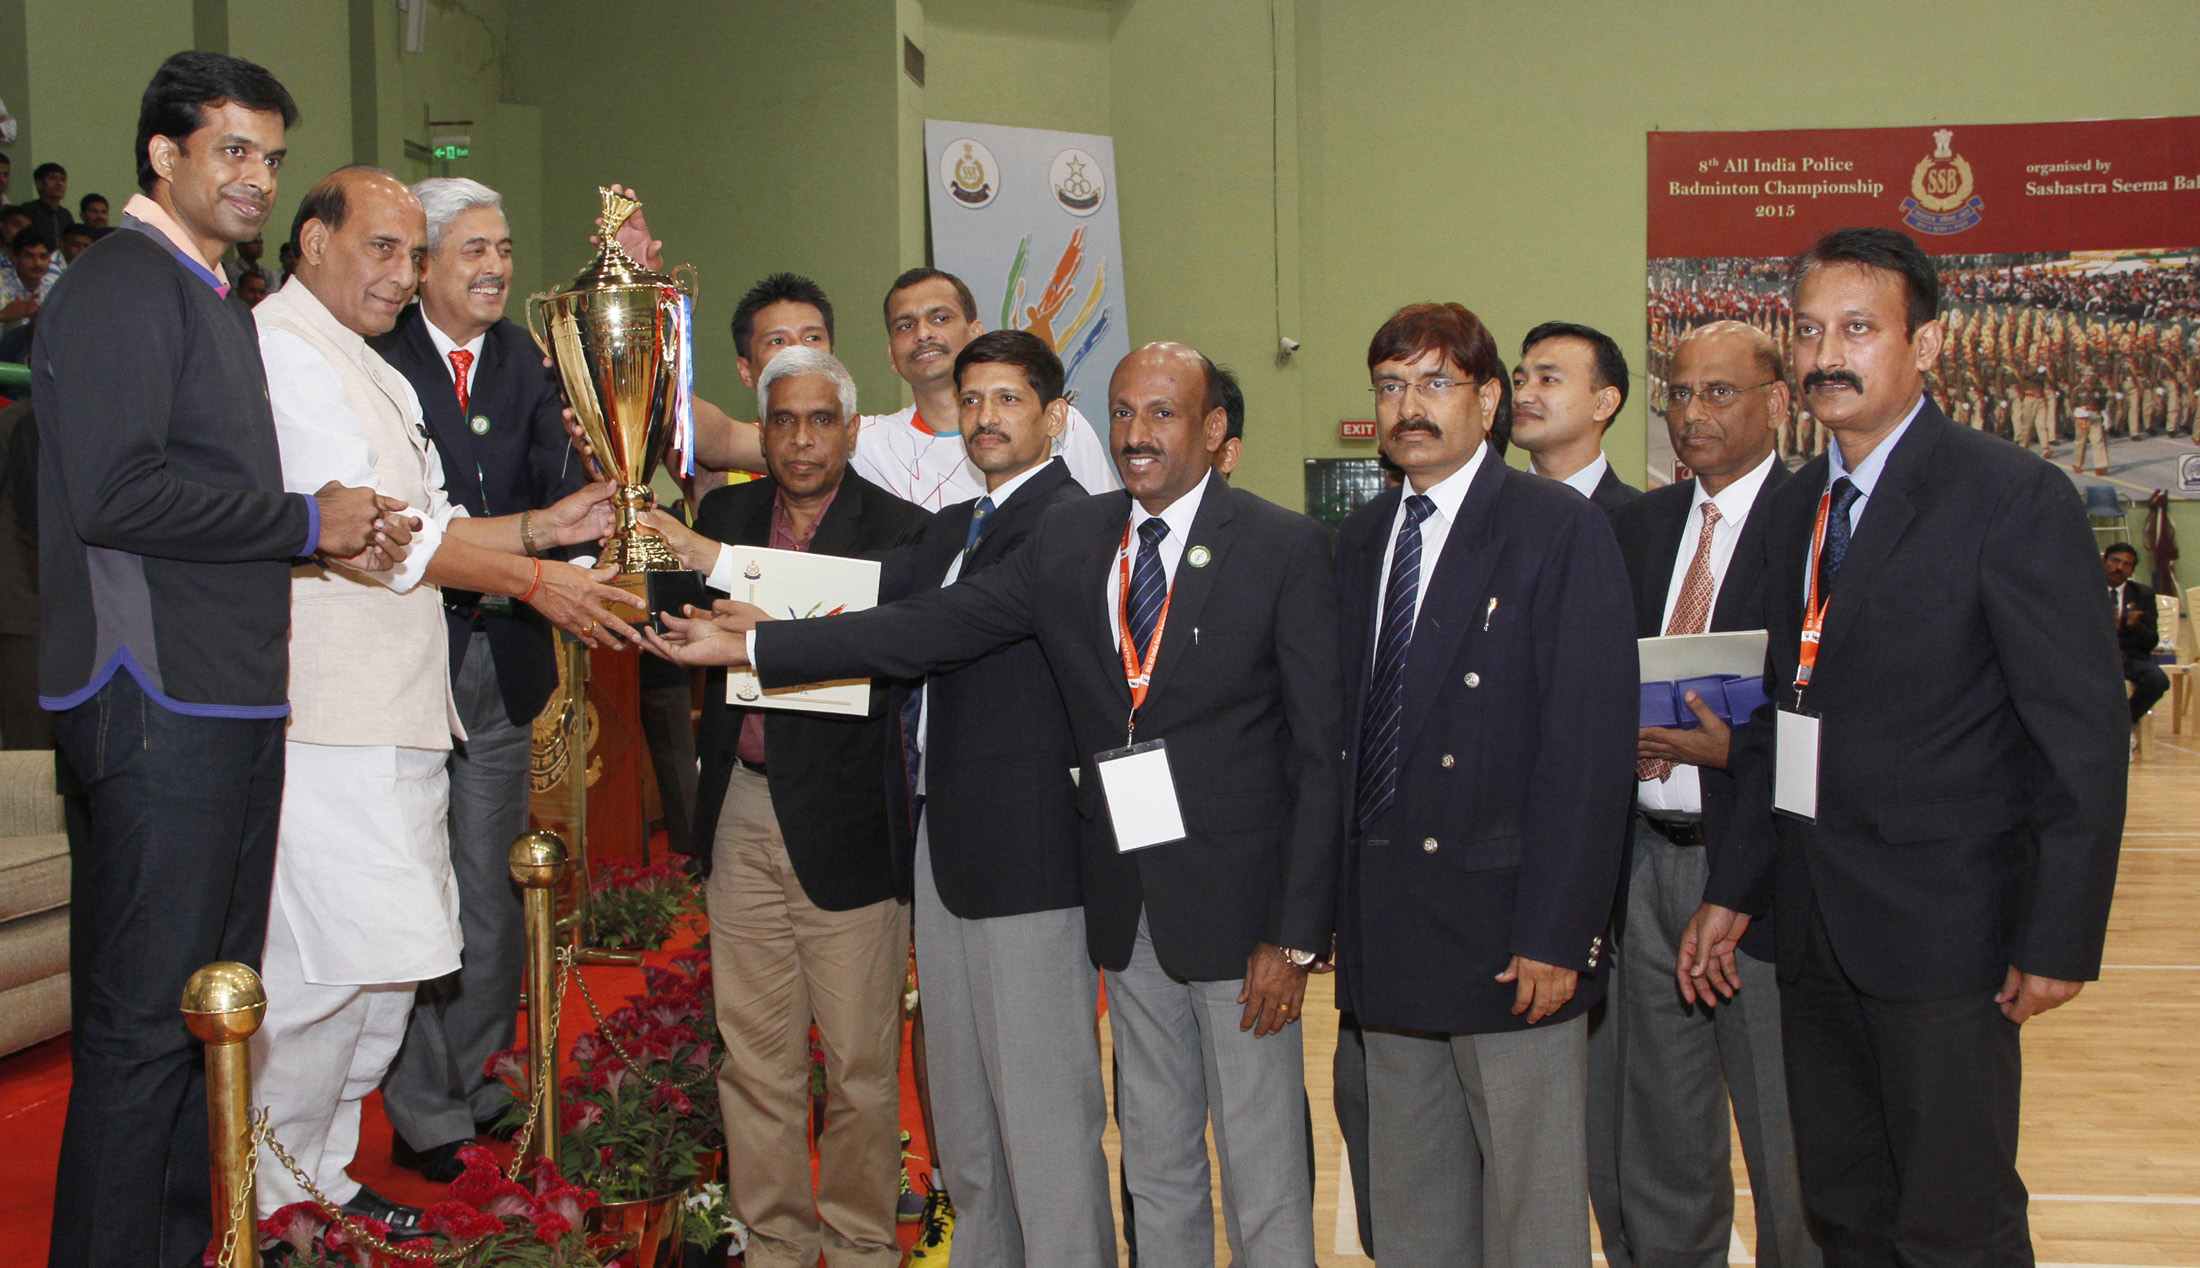 The Union Home Minister, Shri Rajnath Singh giving away the awards, during the Closing Ceremony of the 8th All-India Police Badminton Championship-2015, in New Delhi on November 06, 2015.  	The Director General, Sashastra Seema Bal, Shri B.D. Sharma is also seen.